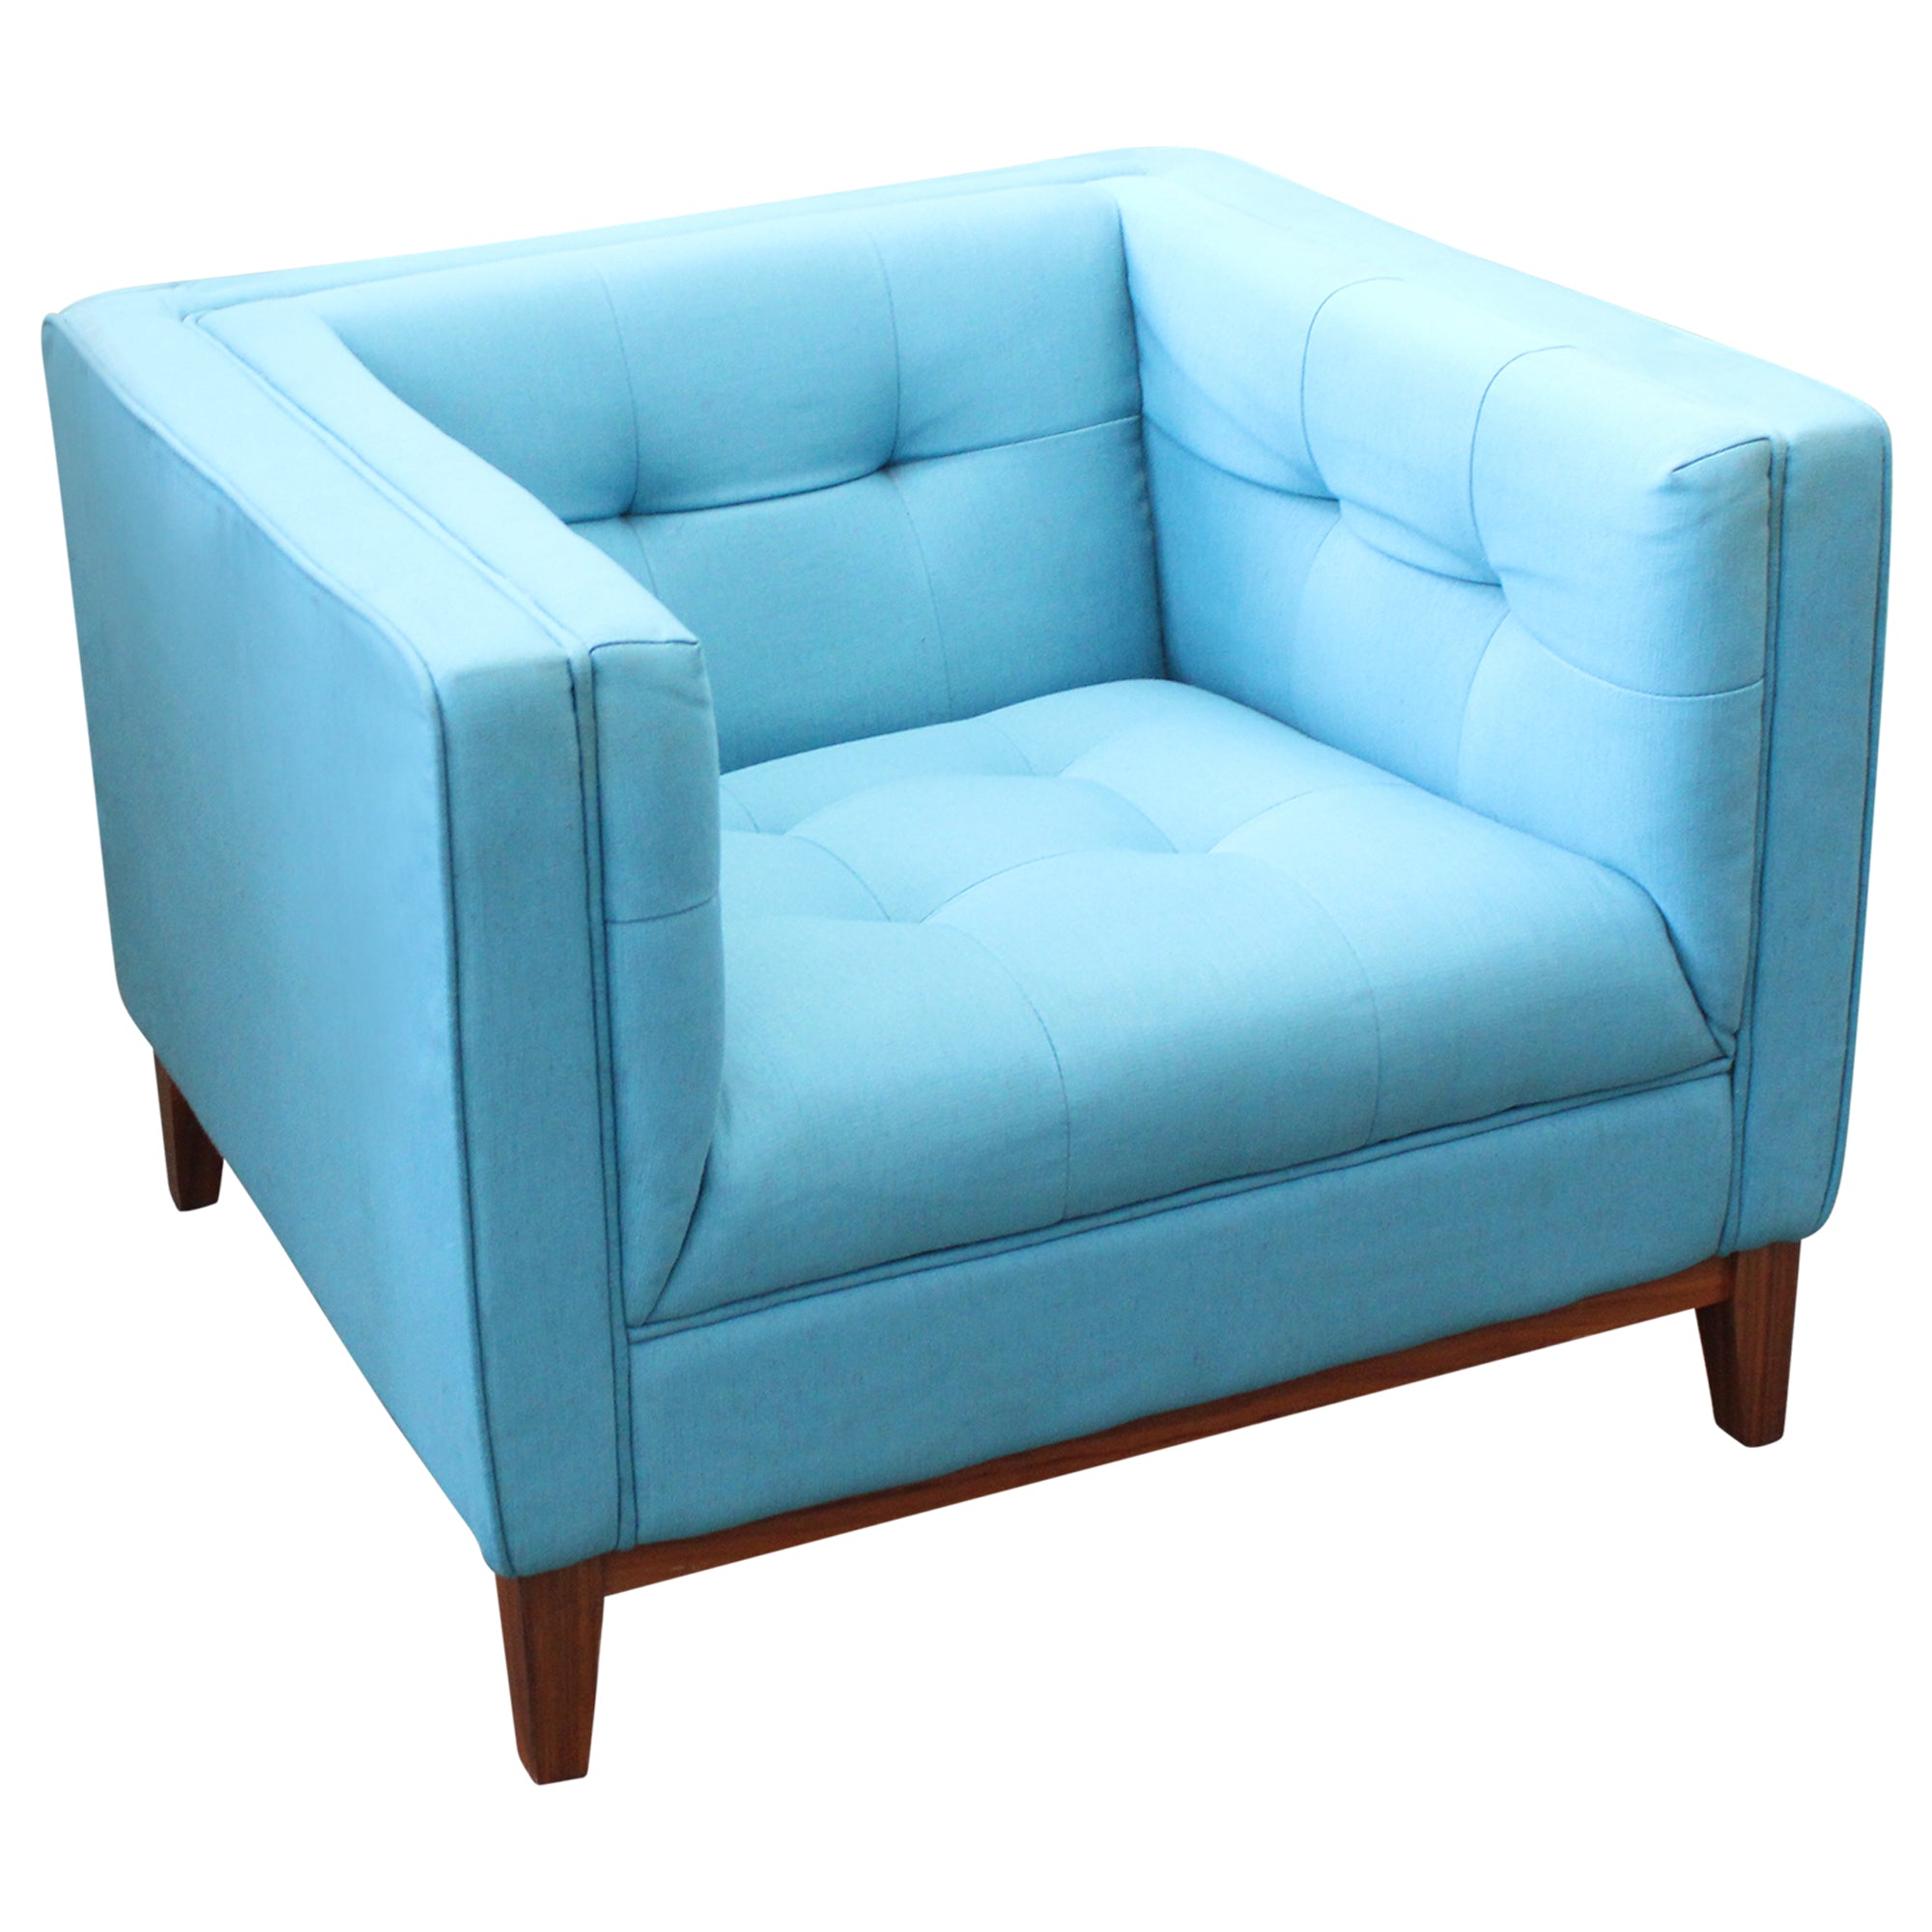 Atwood Chair by Gus Modern - Blue - Preowned